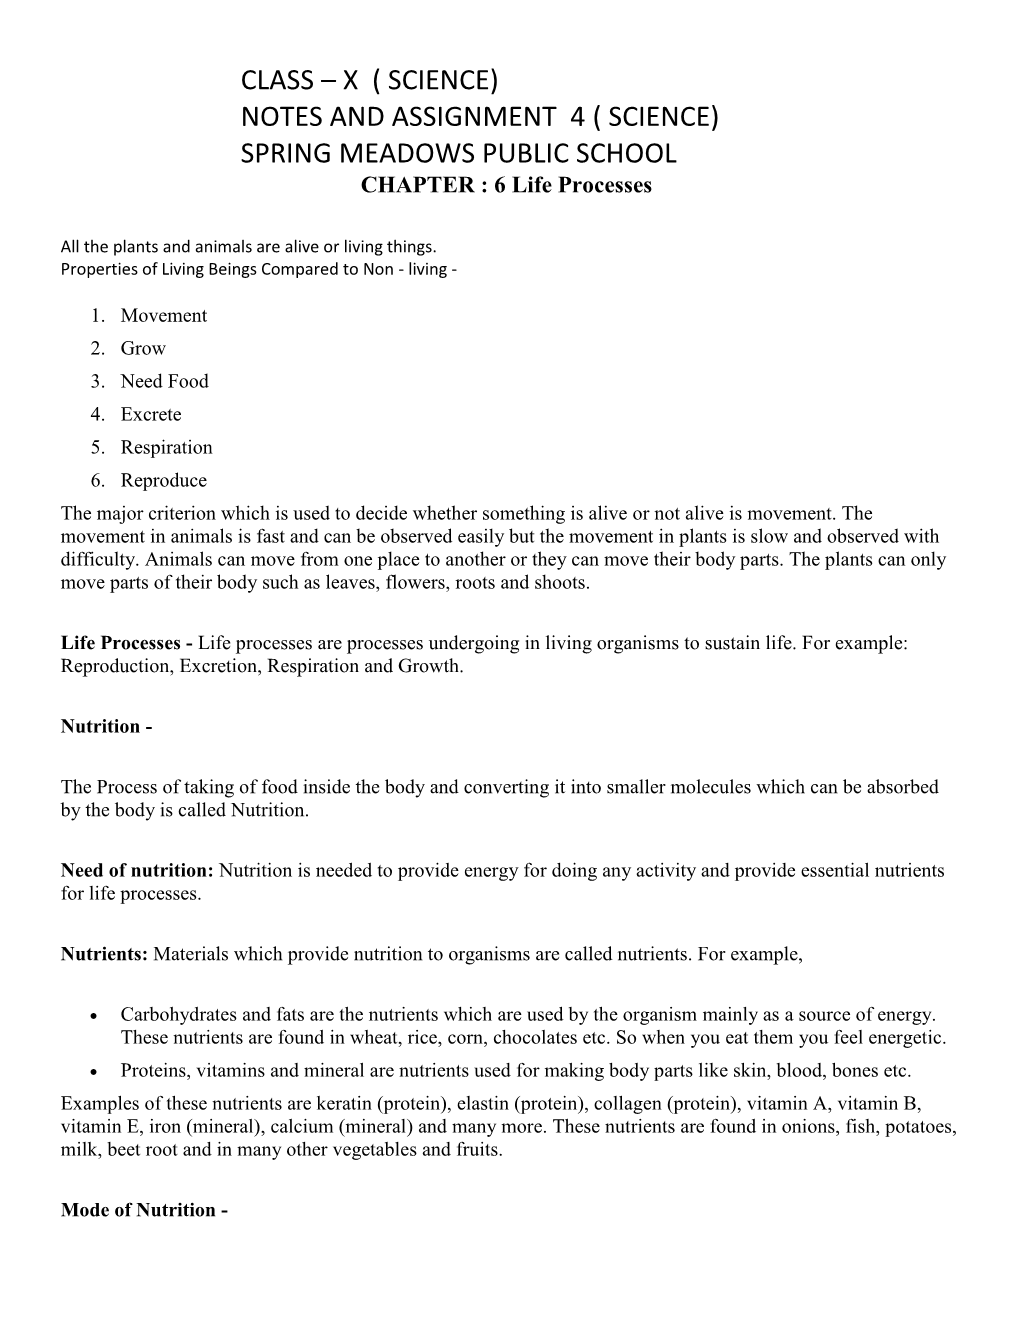 NOTES and ASSIGNMENT 4 ( SCIENCE) SPRING MEADOWS PUBLIC SCHOOL CHAPTER : 6 Life Processes